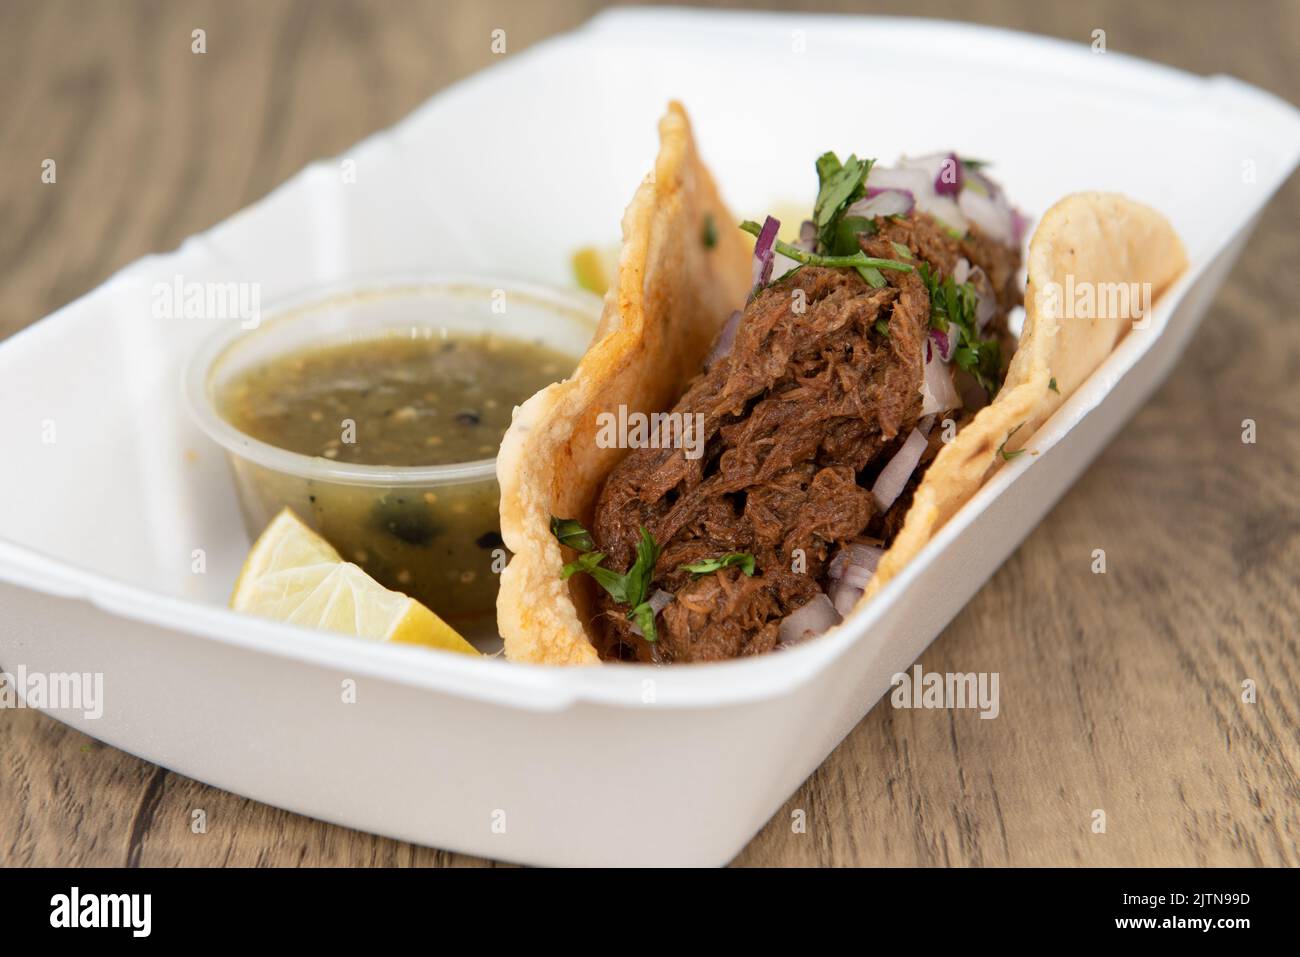 Single birria taco completely fills the tortilla shell and served with salsa and limes as an appetizer. Stock Photo